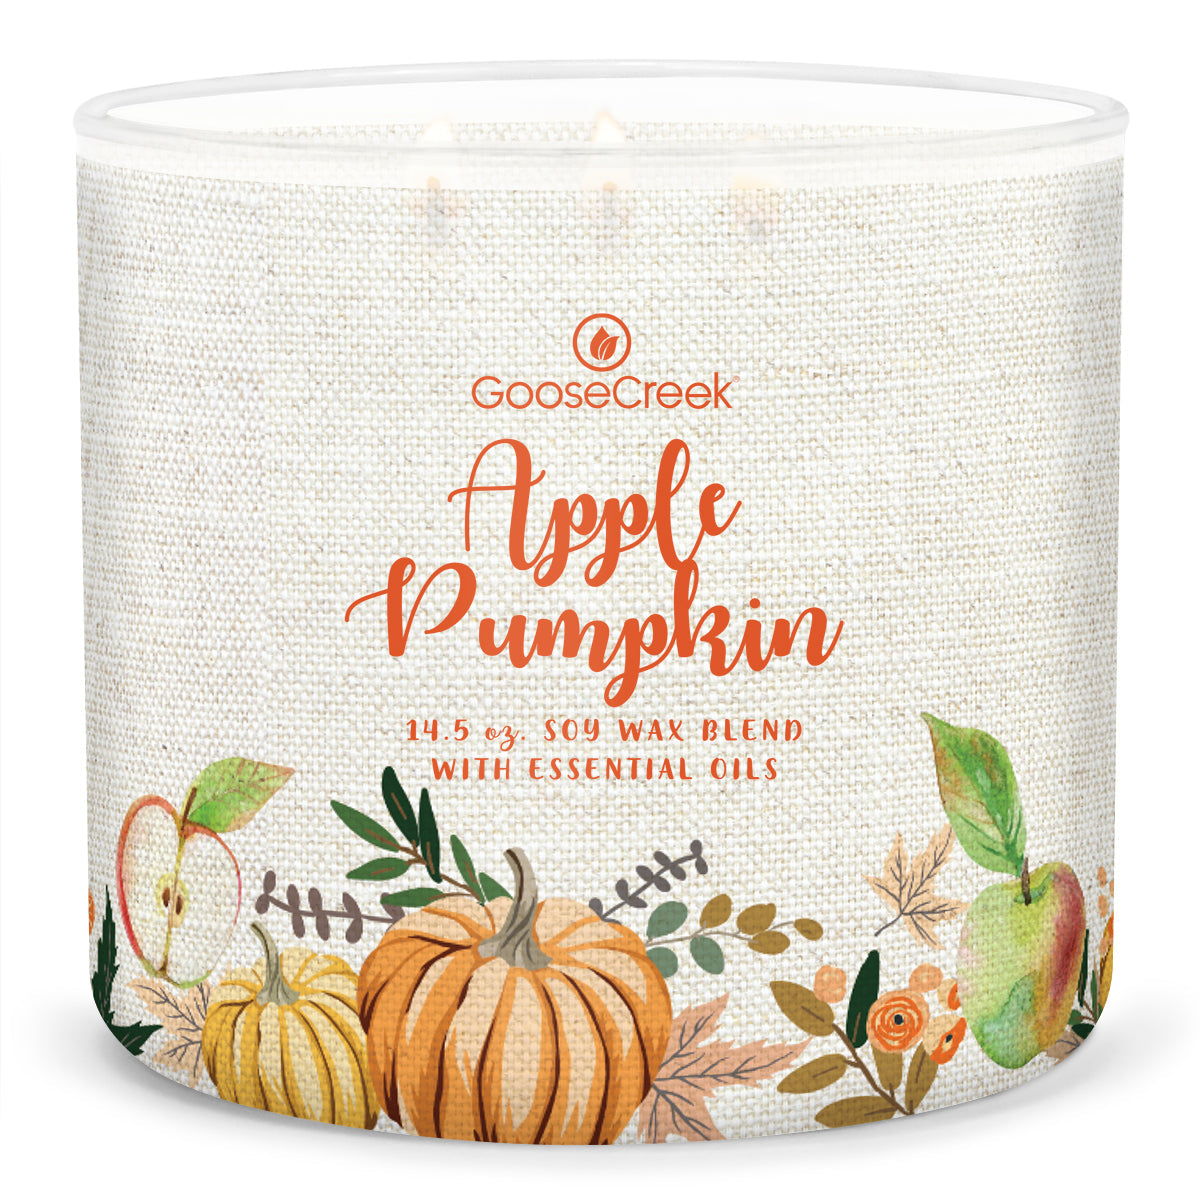 Autumn Outdoors - Fragrance Refill – Goose Creek Candle